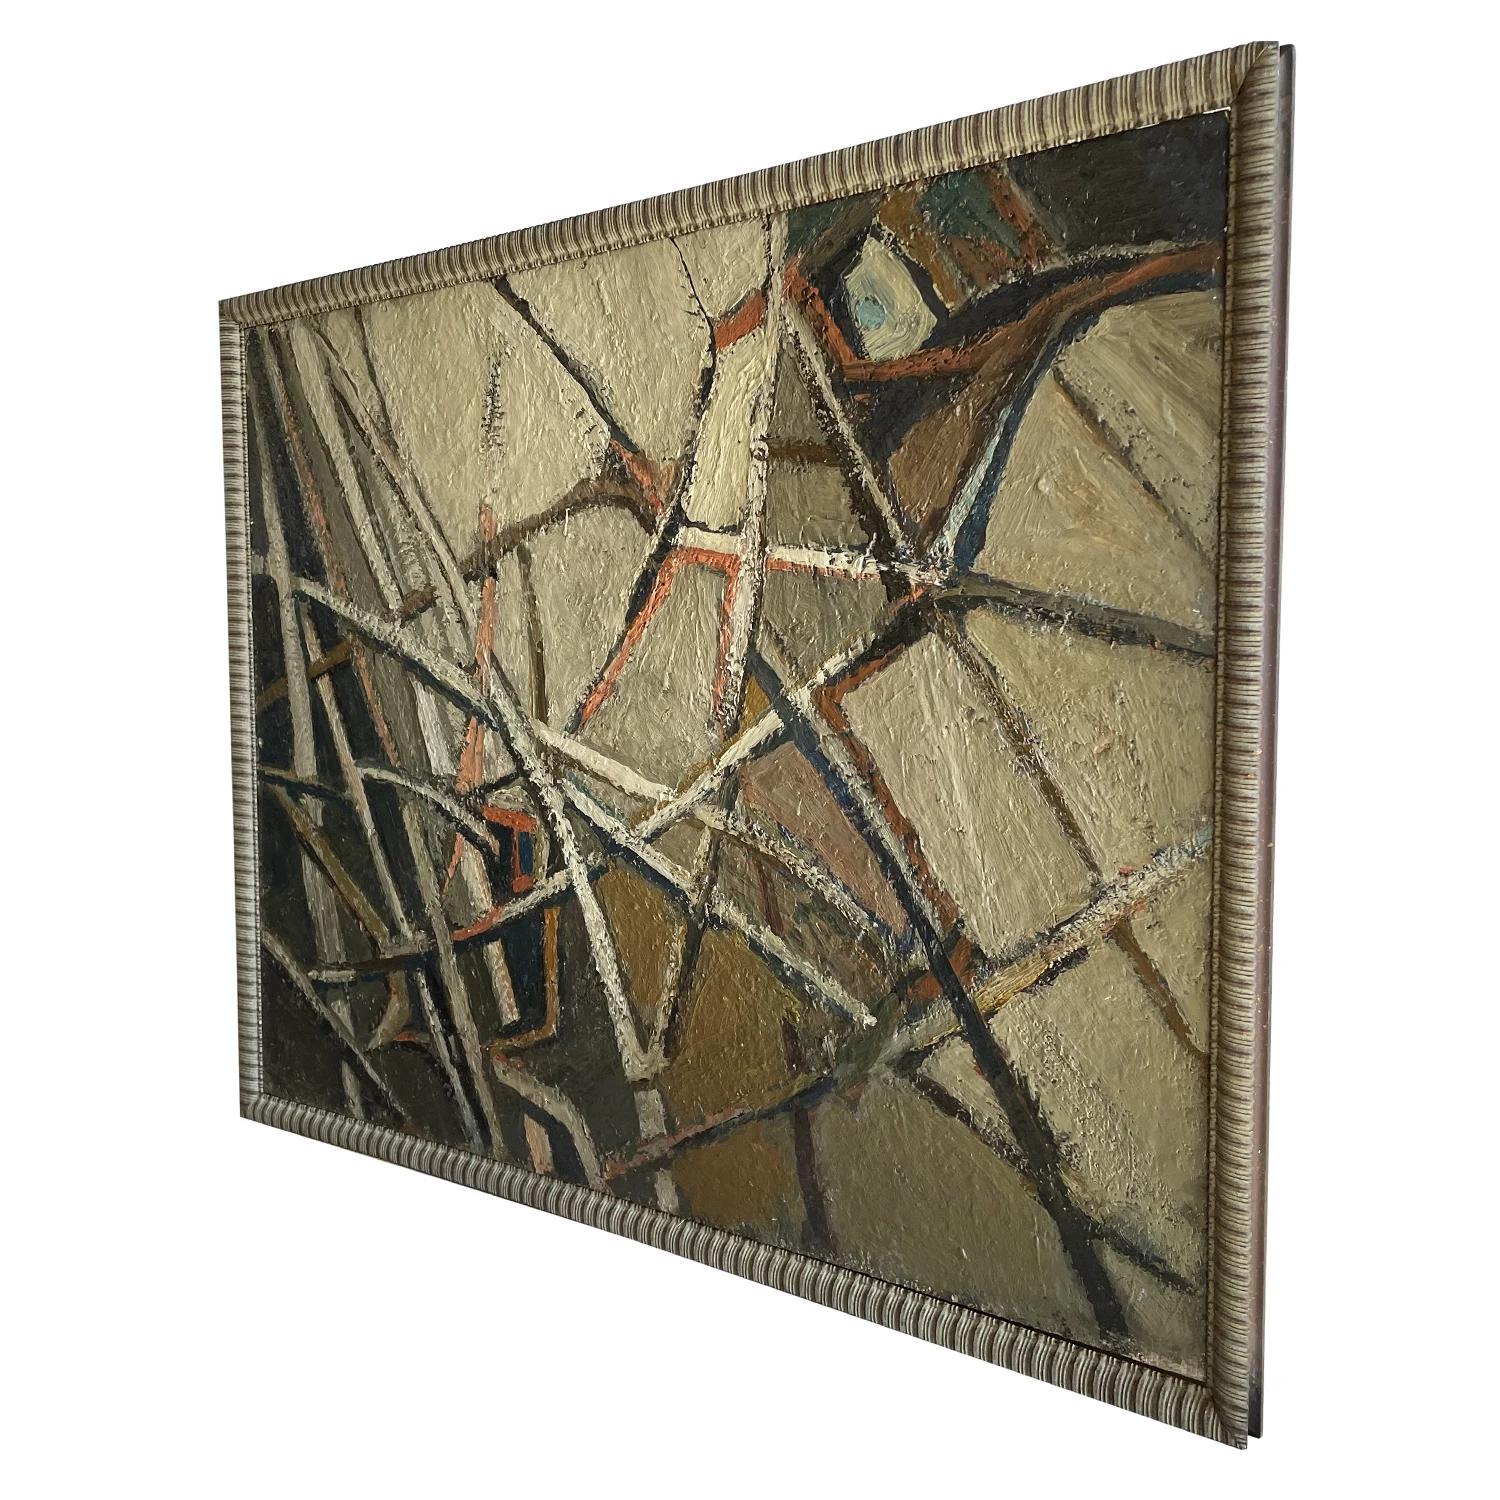 A grey-green, black vintage Mid-Century Modern French abstract composition oil on wood painting, painted by Daniel Clesse in good condition. The painting is slightly curved, due to age. Signed on the lower left. Wear consistent with age and use.